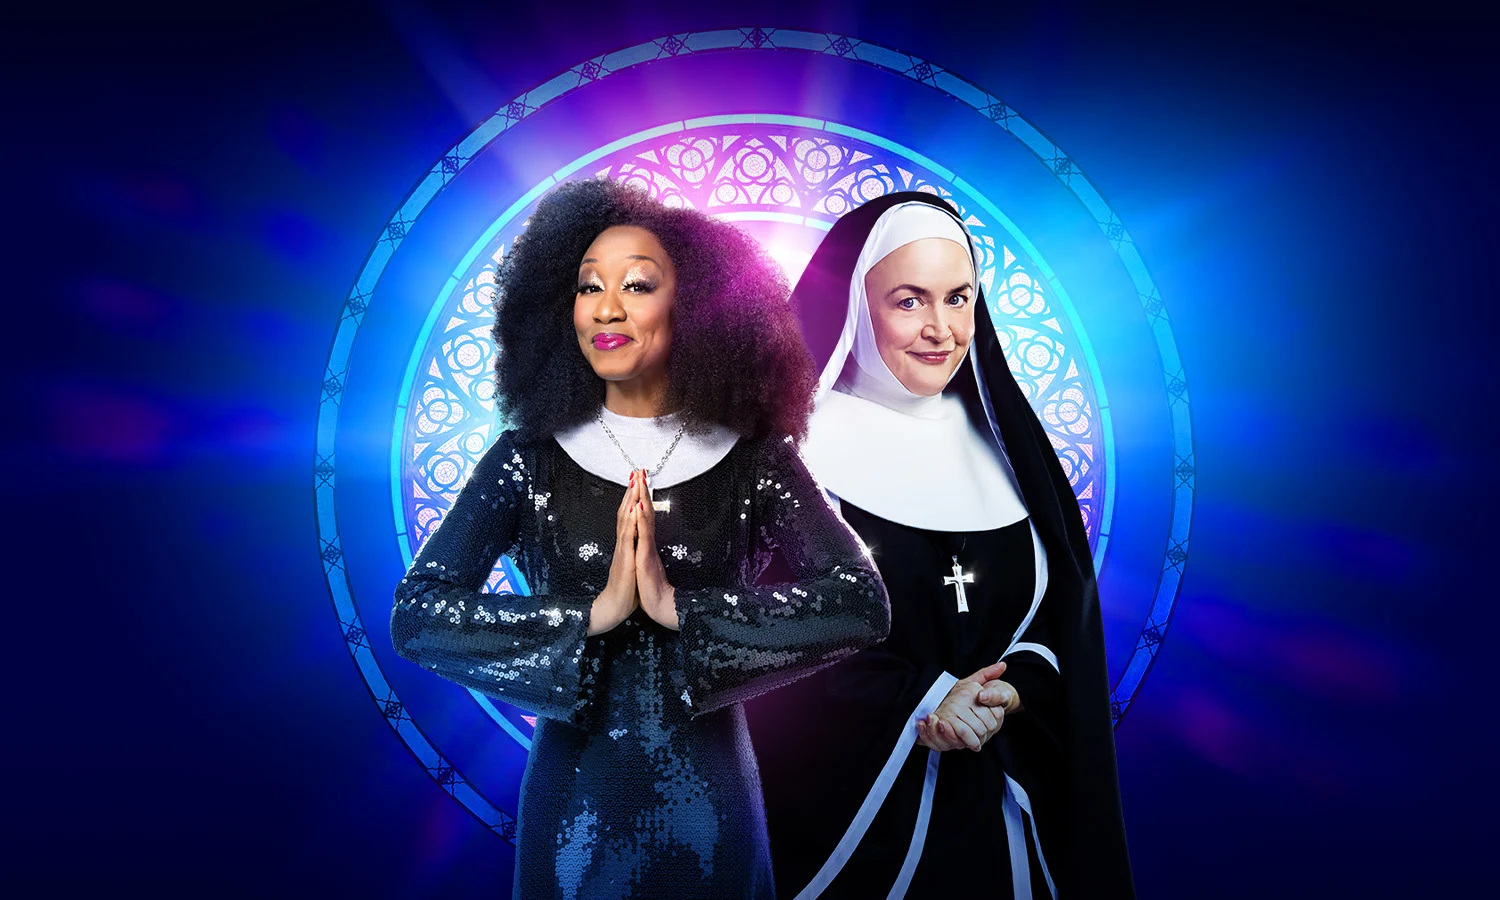 A black woman and a white woman both in nun's habits standing in front of a stained glass window.